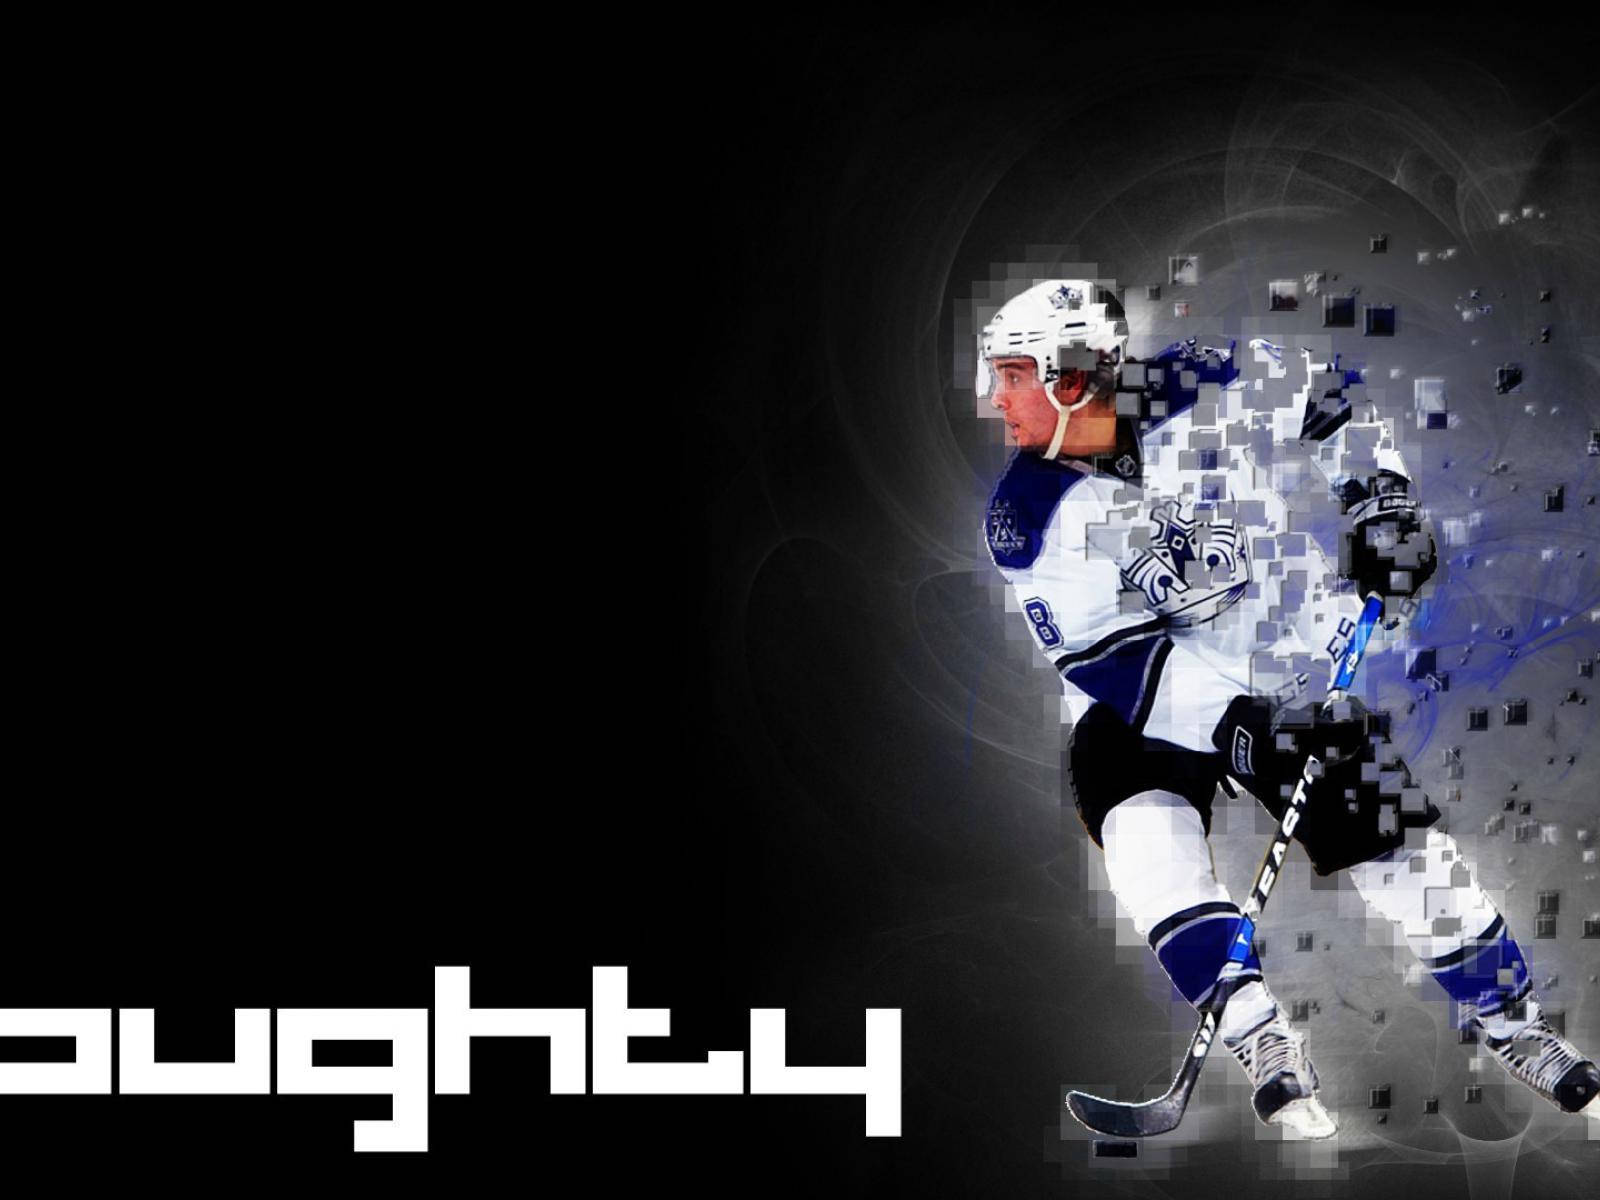 Drew Doughty Last Name With Pixelated Effect Wallpaper